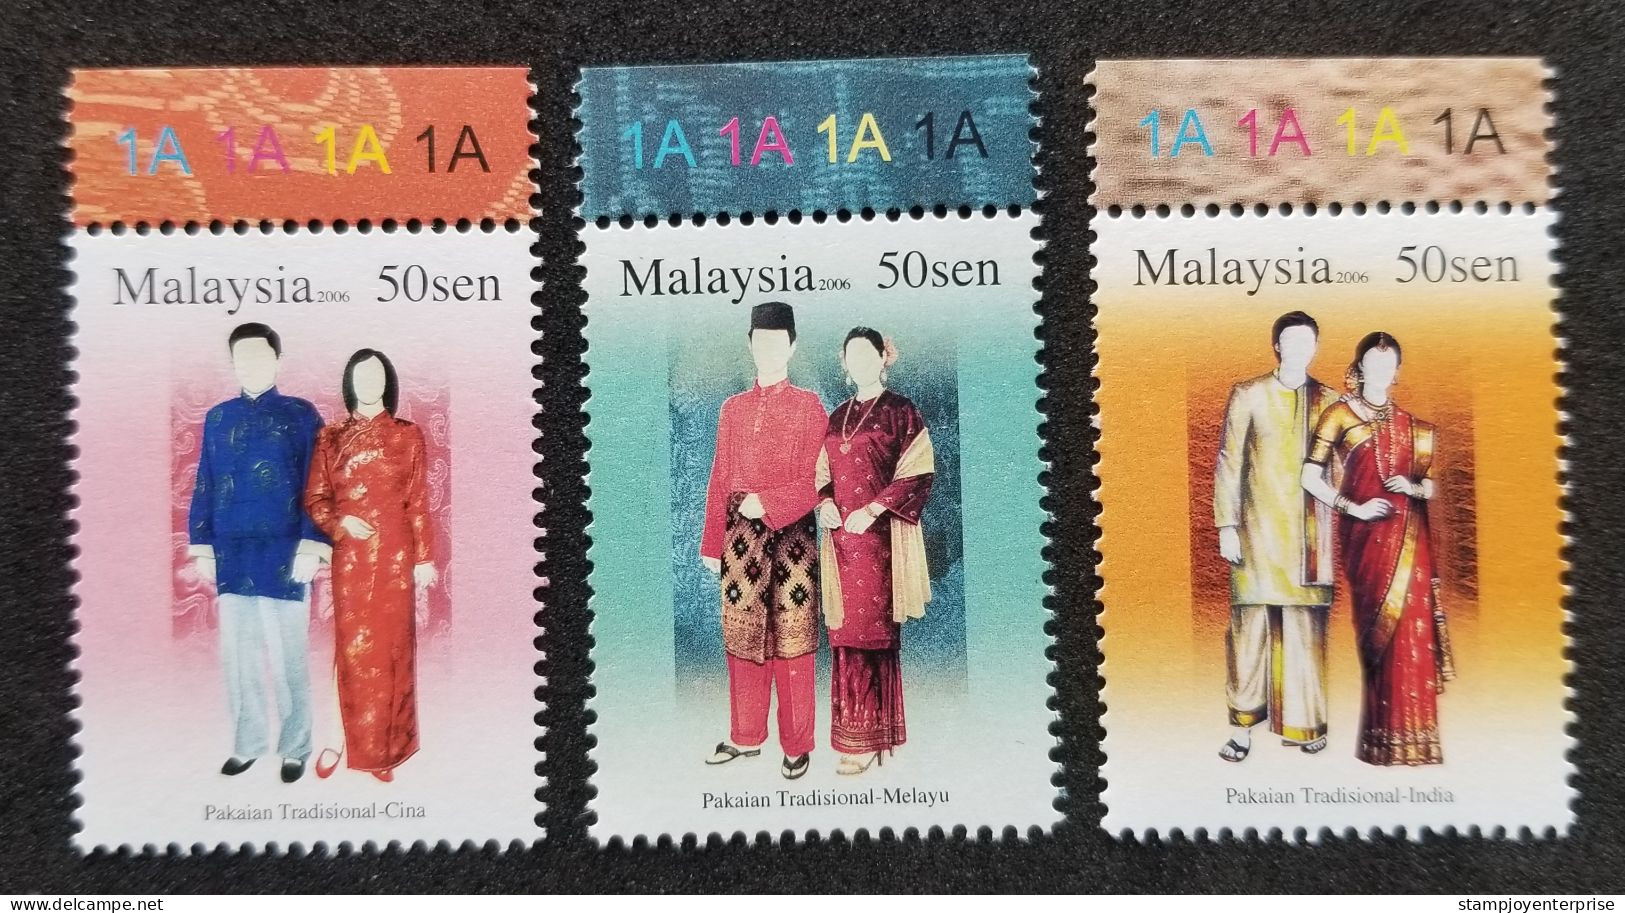 Malaysia Traditional Costumes 2006 Attire Costume Culture Cloth Art Chinese India Malay (stamp Plate) MNH - Malasia (1964-...)